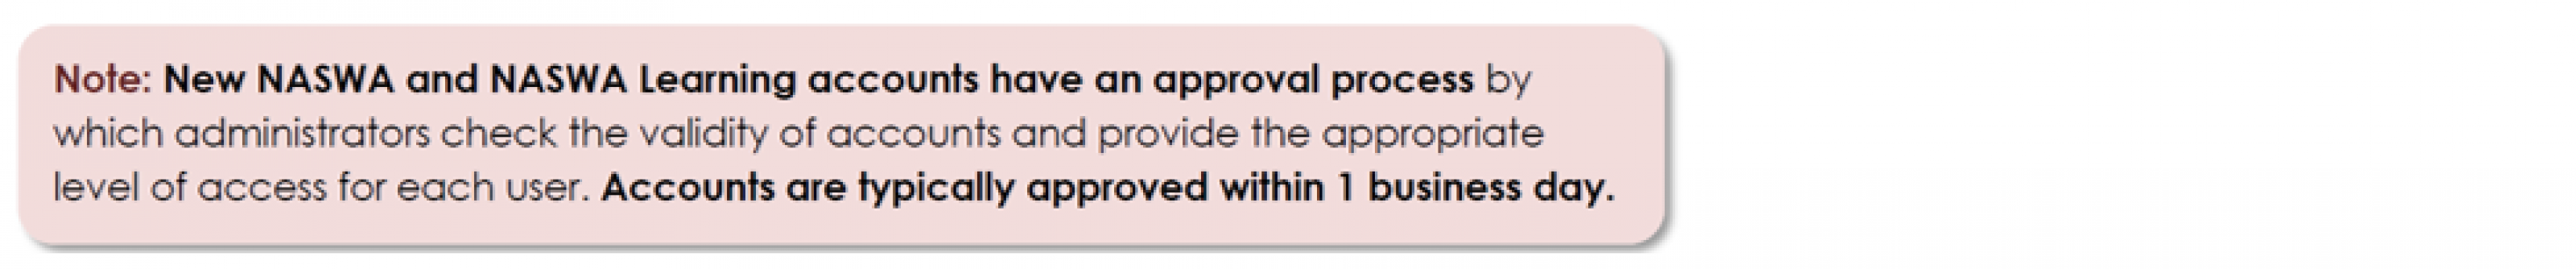 New NASWA and NASWA Learning accounts have an approval process by which administrators check the validity of accounts and provide the appropriate level of access for each user. Accounts are typically approved within 1 business day.